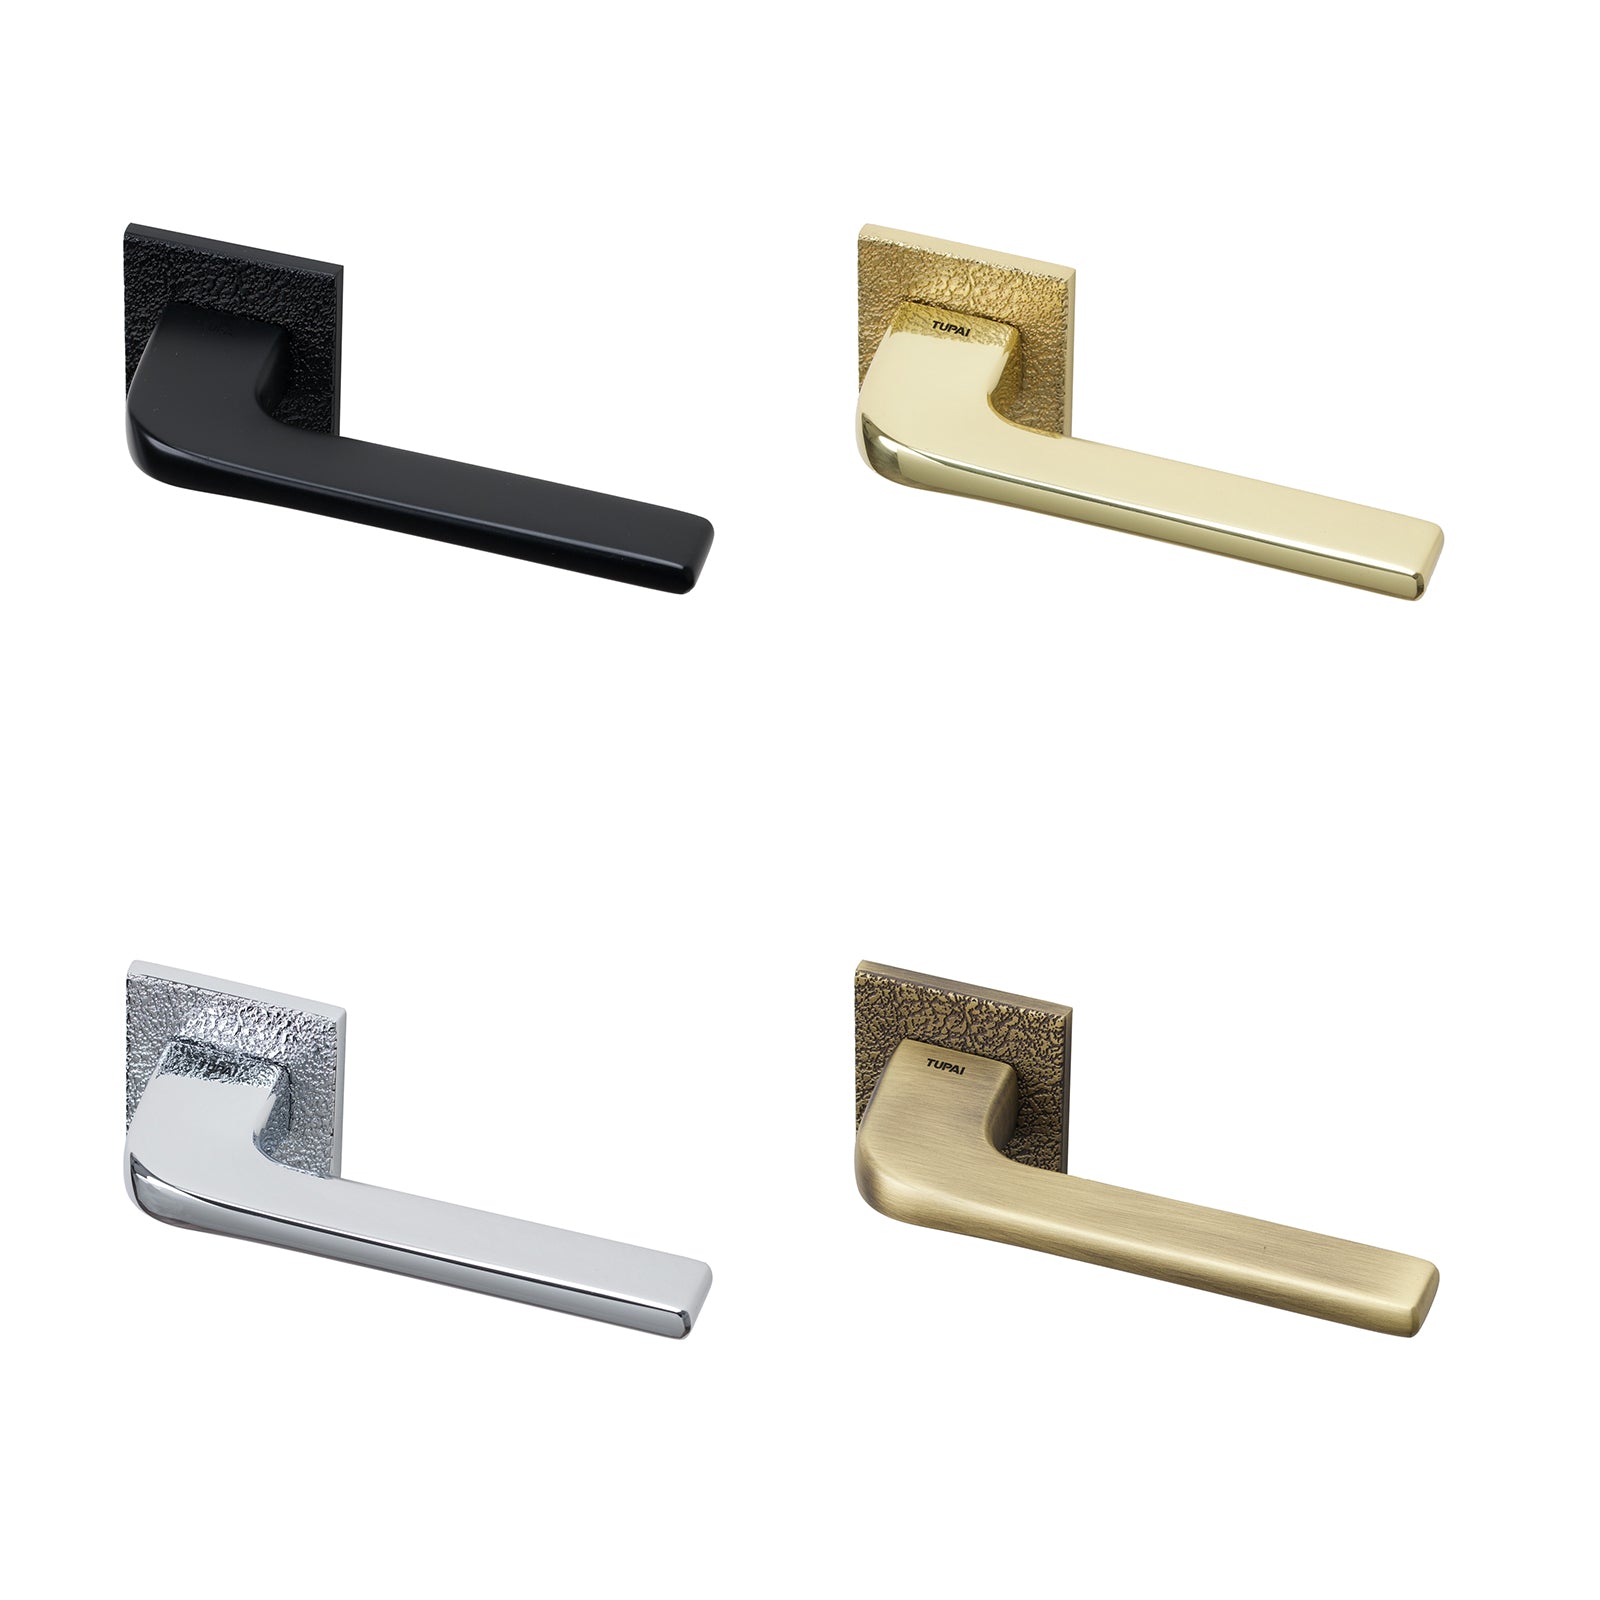 Tupai Perdrada Leather texture lever on rose door handles in four distinct finishes with 6mm thick round rose